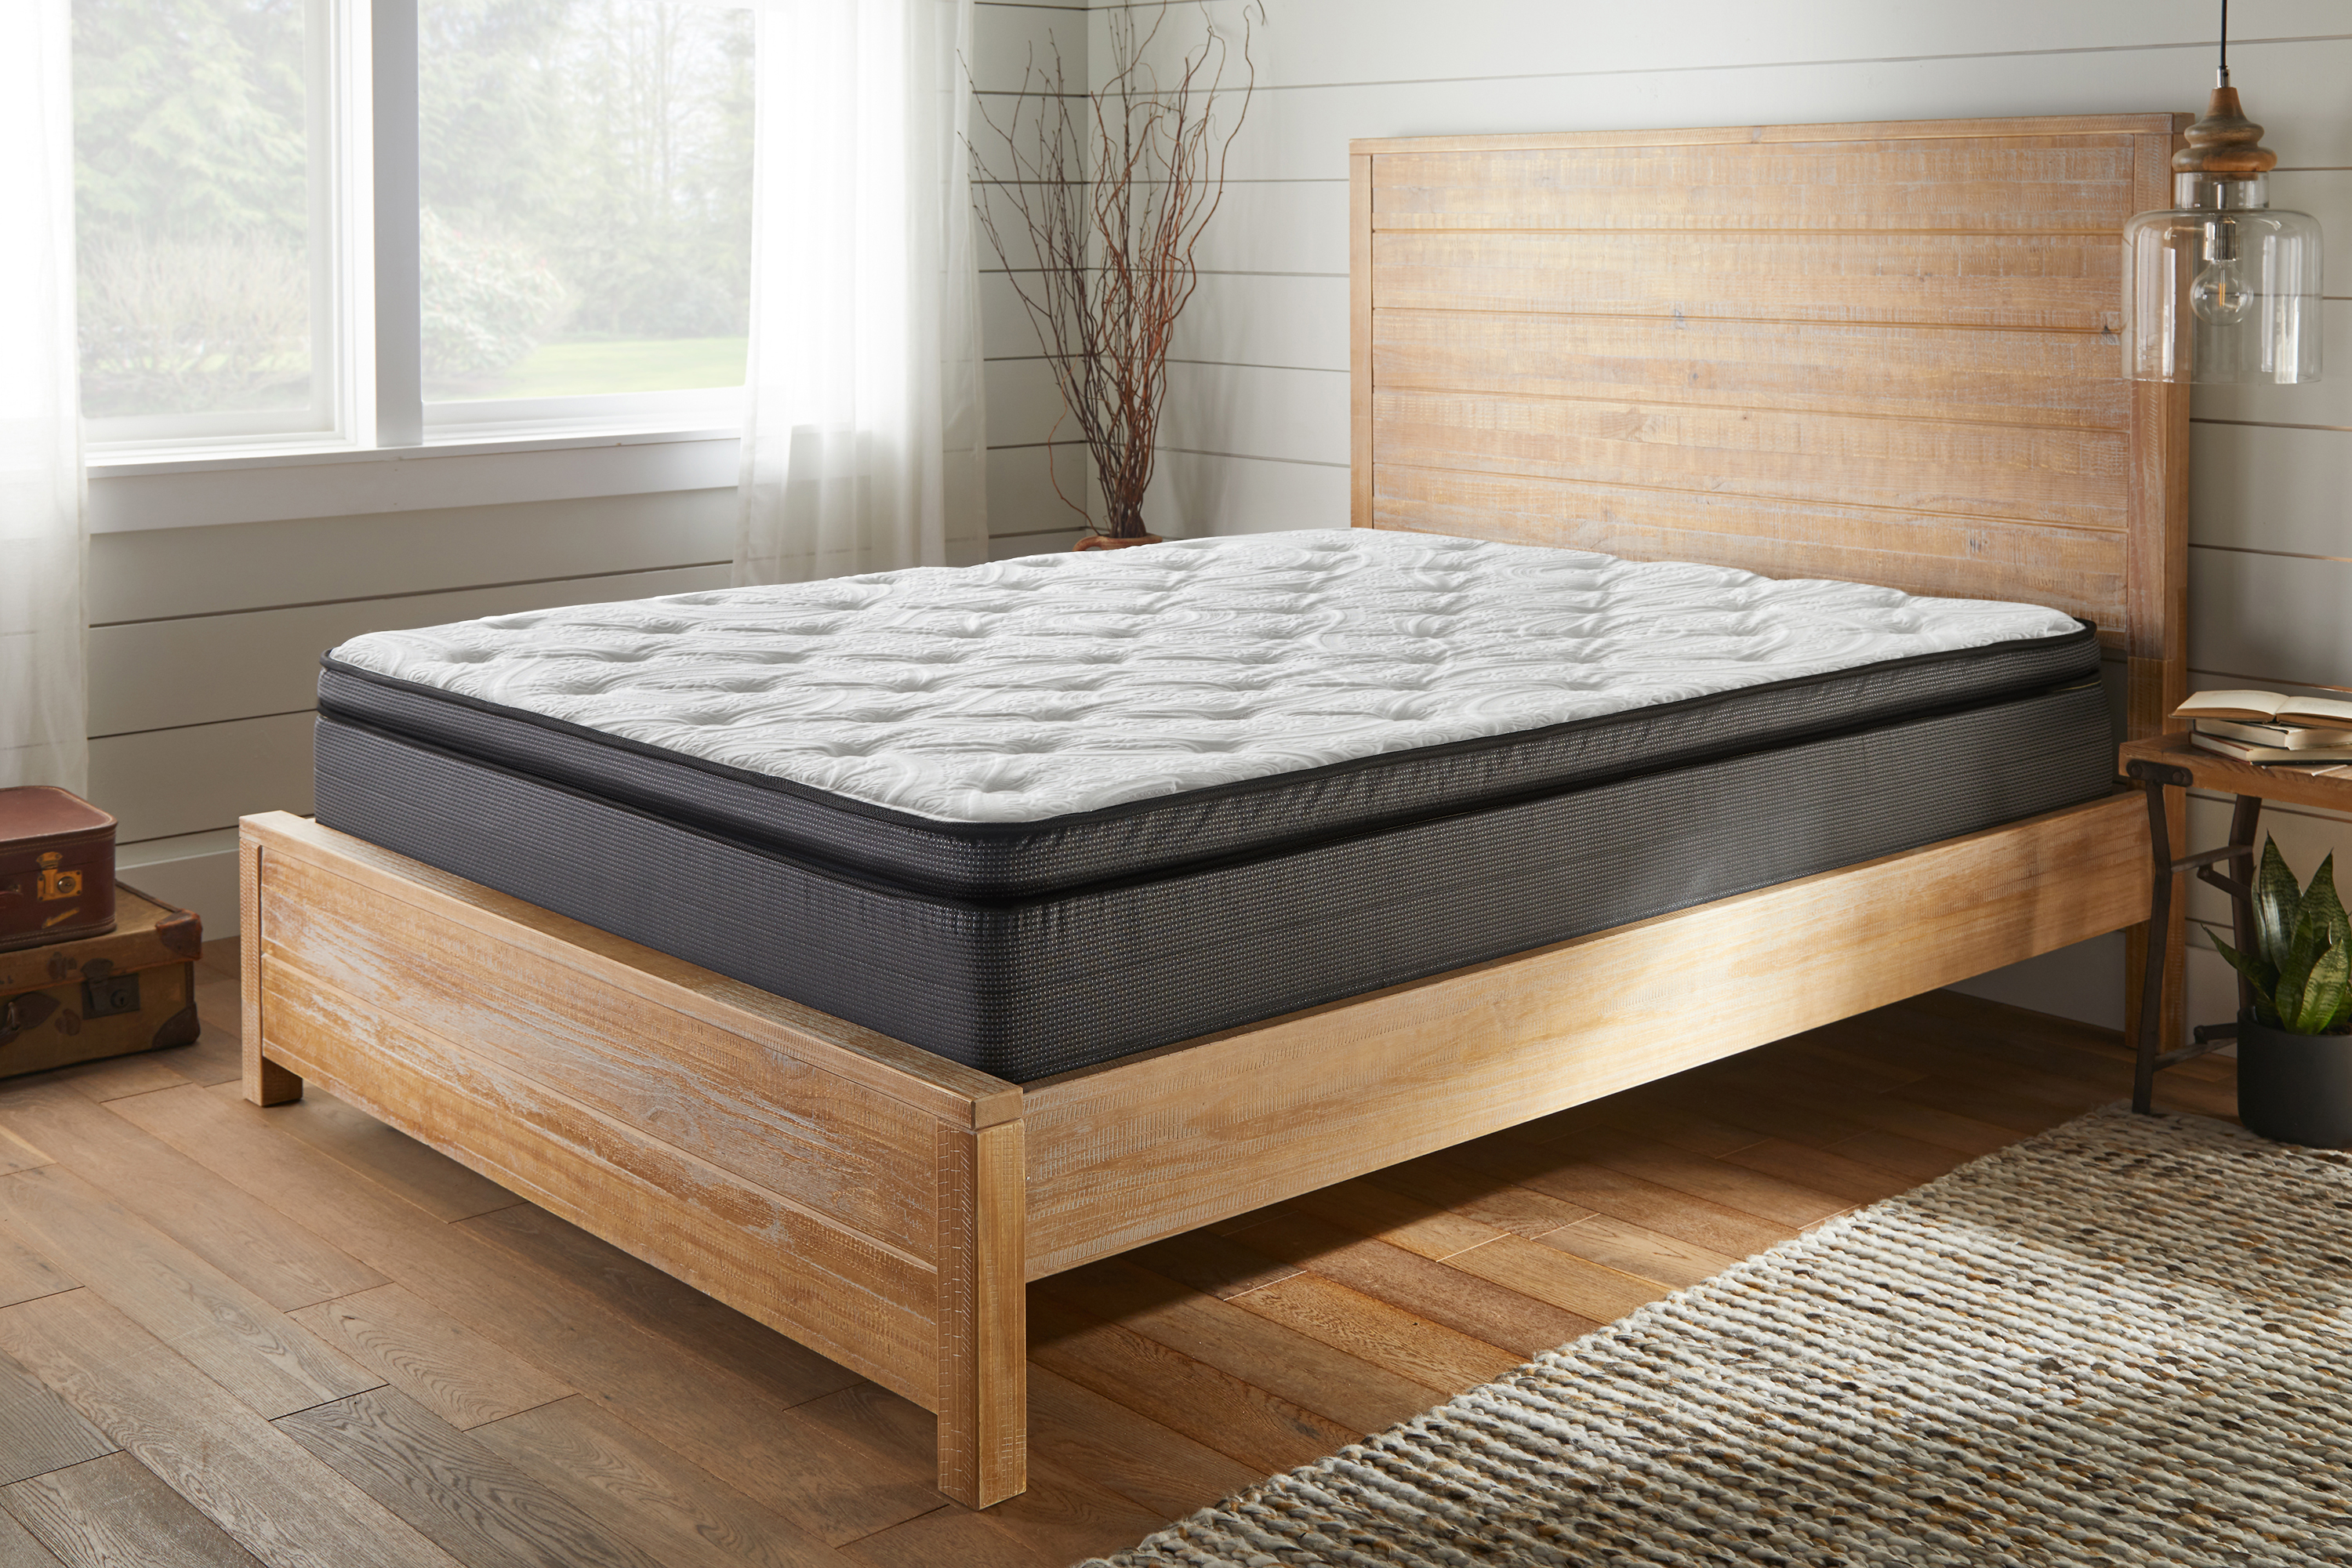 elated plush mattresses by american bedding